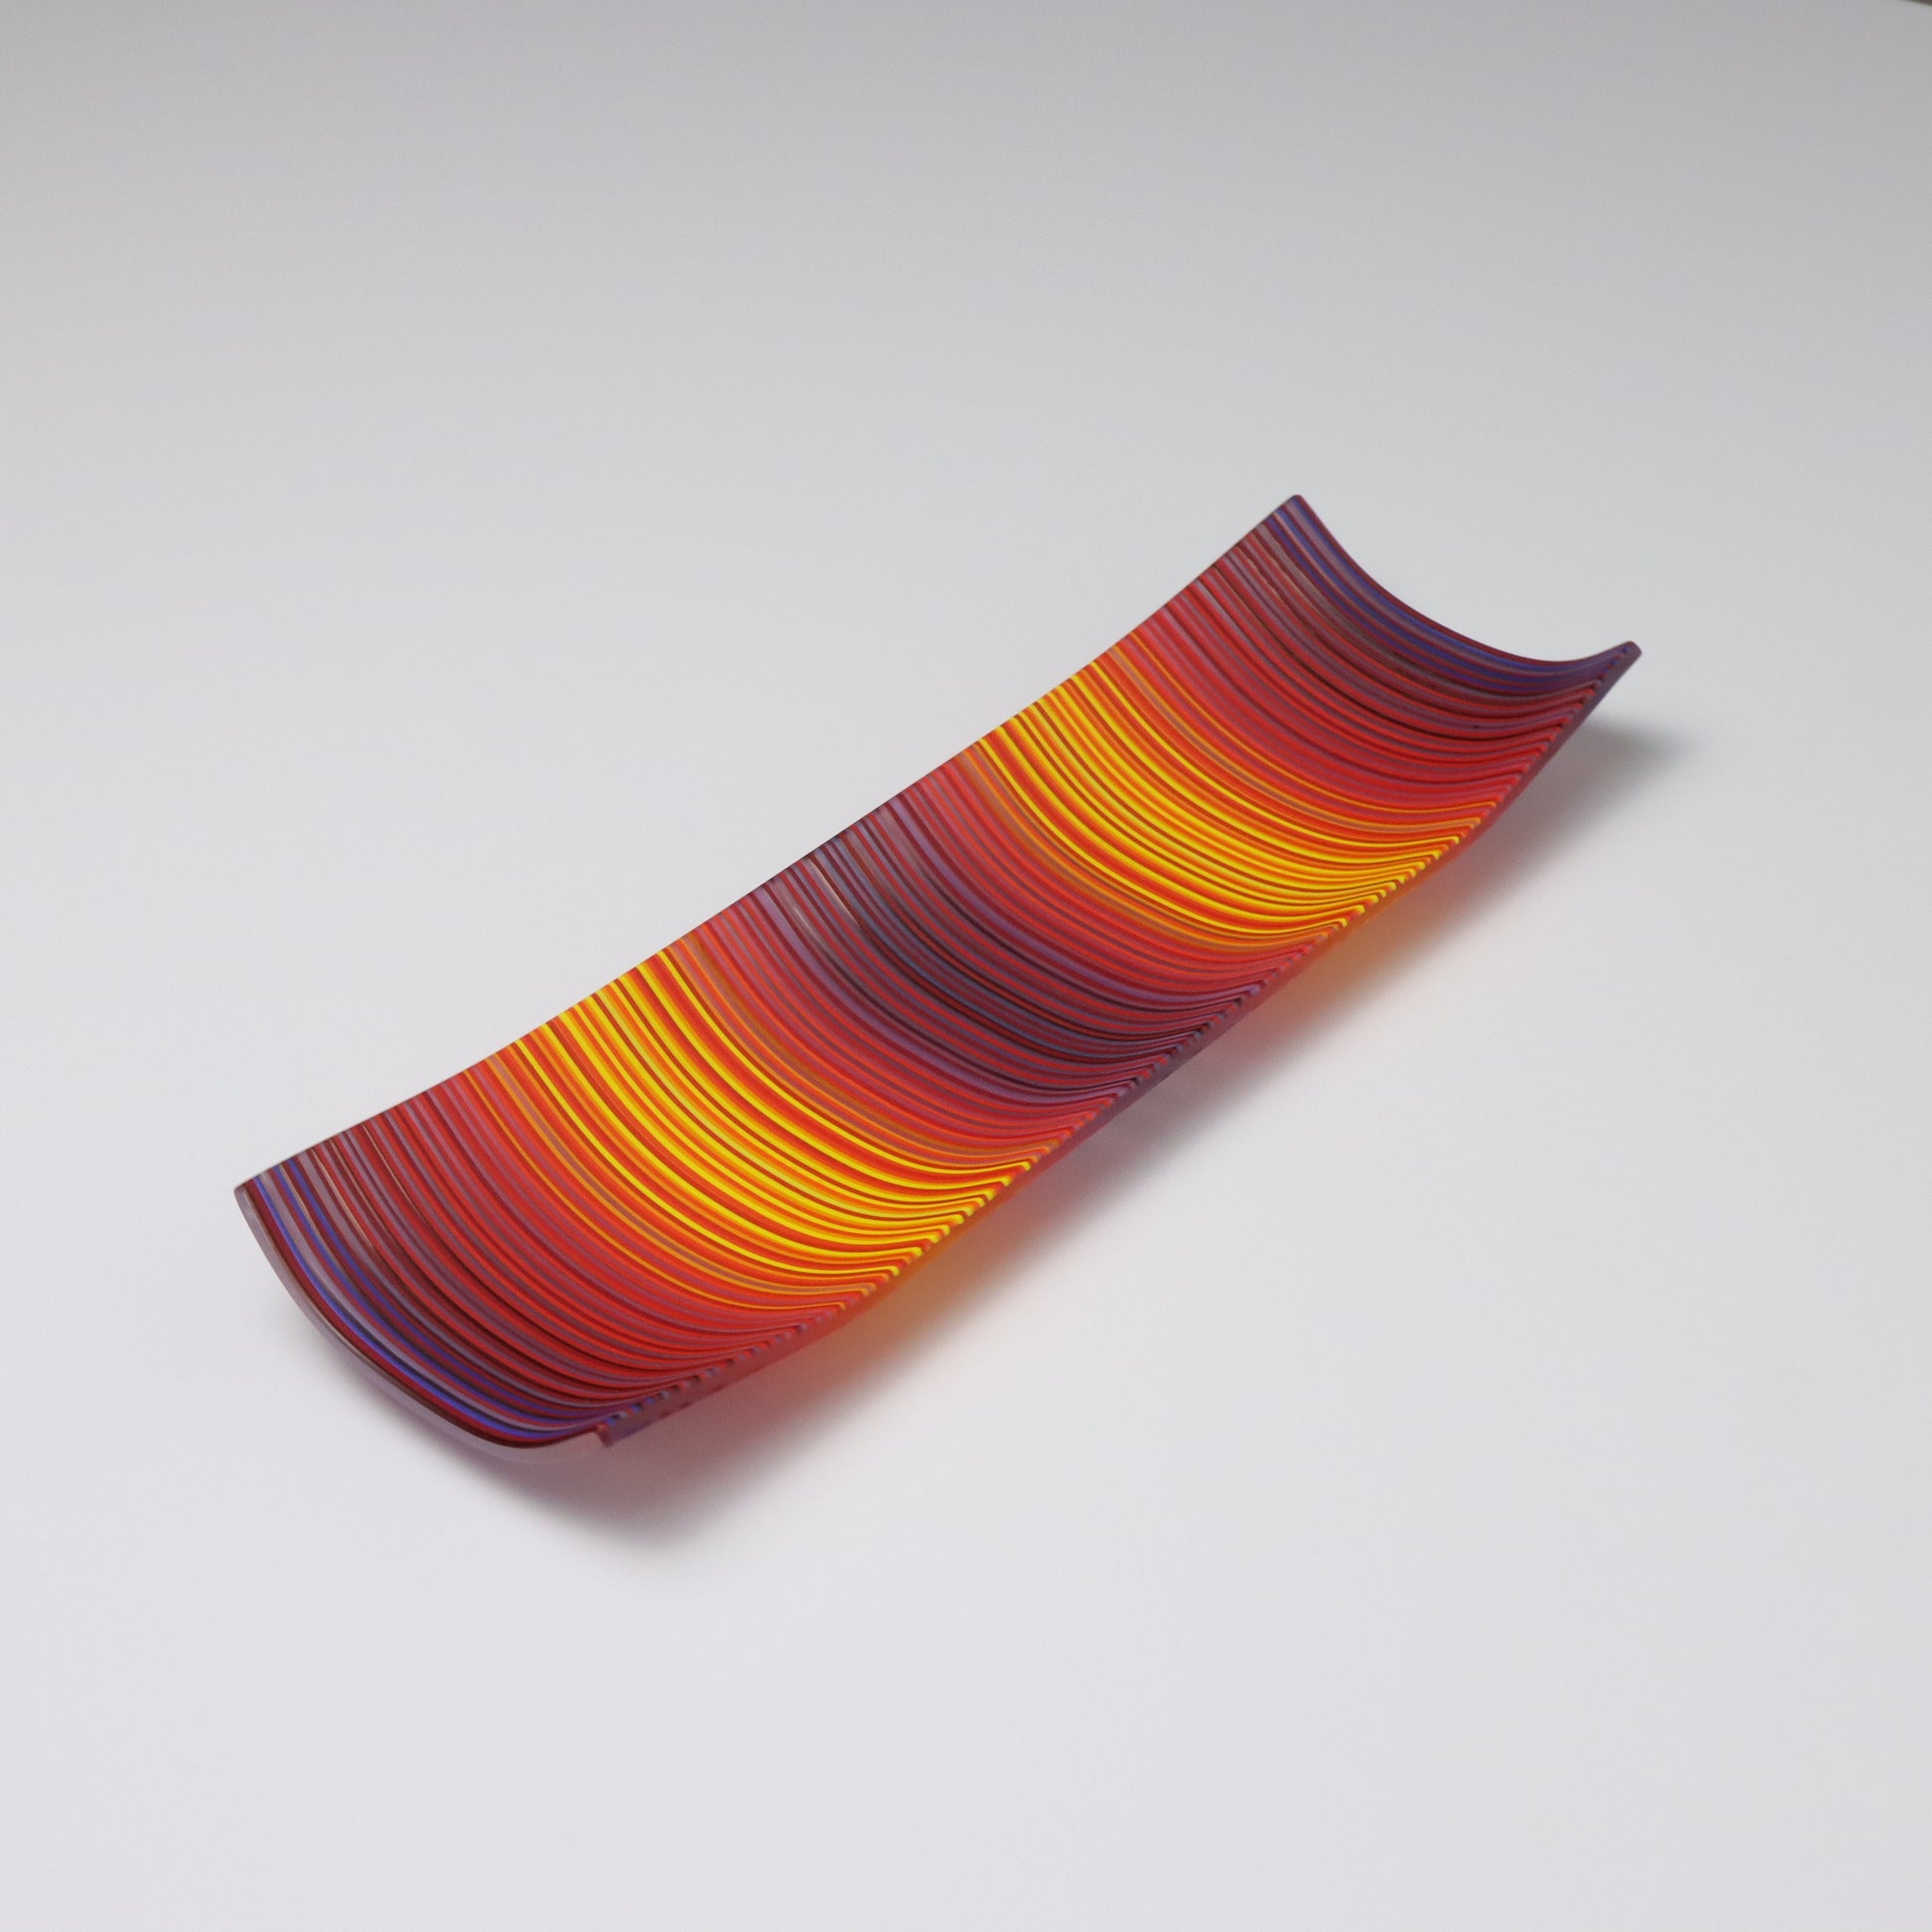 A decorative shallow rectangular boat shaped glass plate with raised corners and a  colourful ColourWave stripe patterns showing key colours of purple and orange and yellow